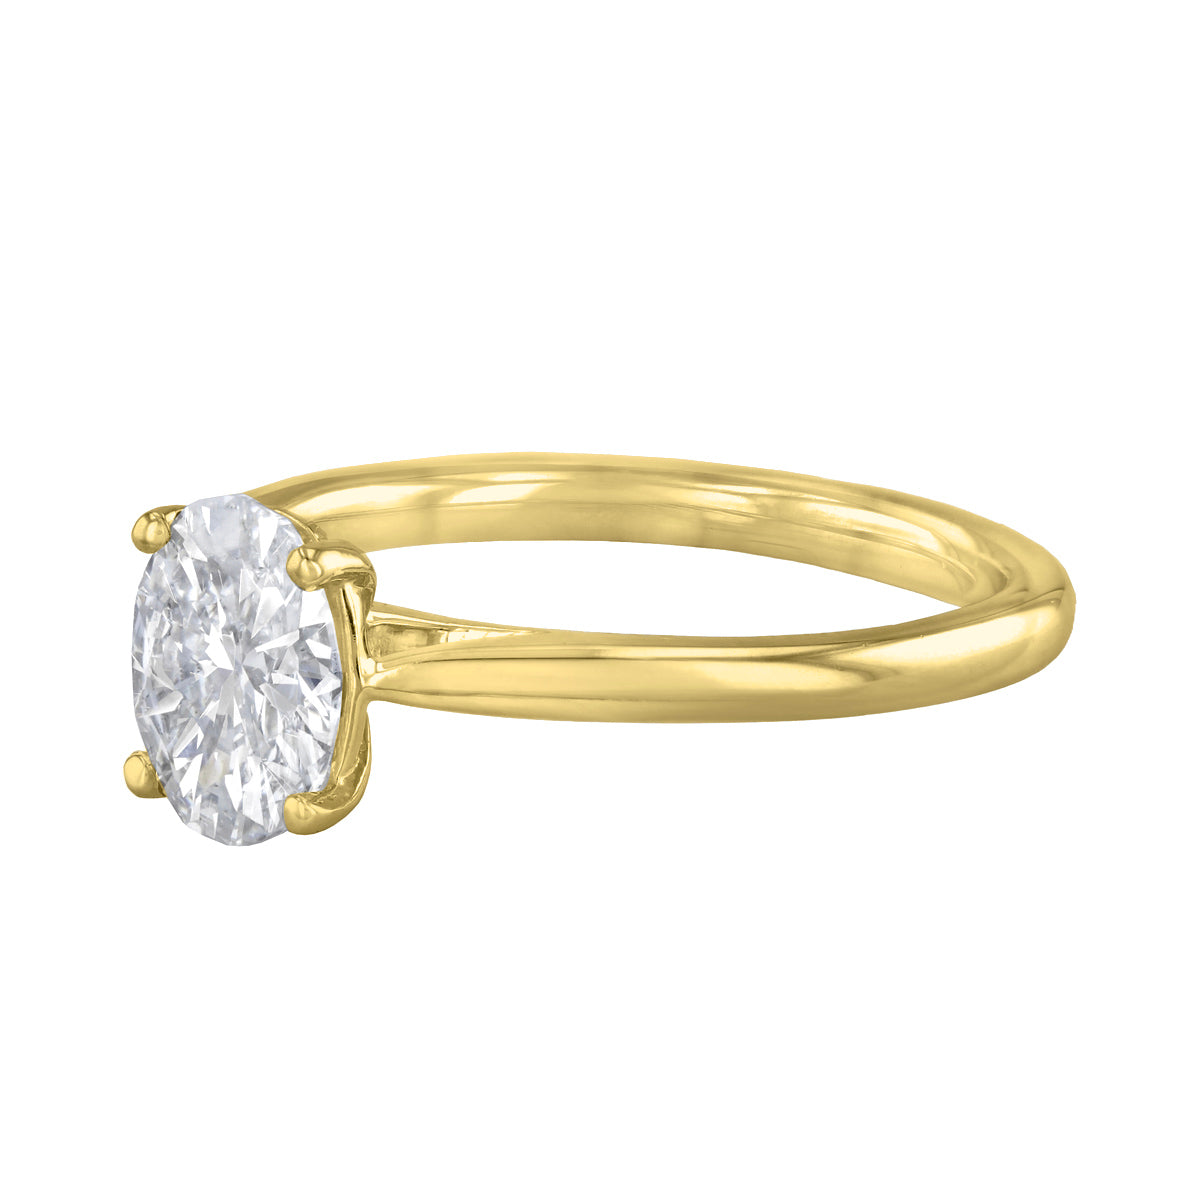 1.00ct Ophelia Oval Cut Diamond Solitaire Engagement Ring | 18ct Yellow Gold